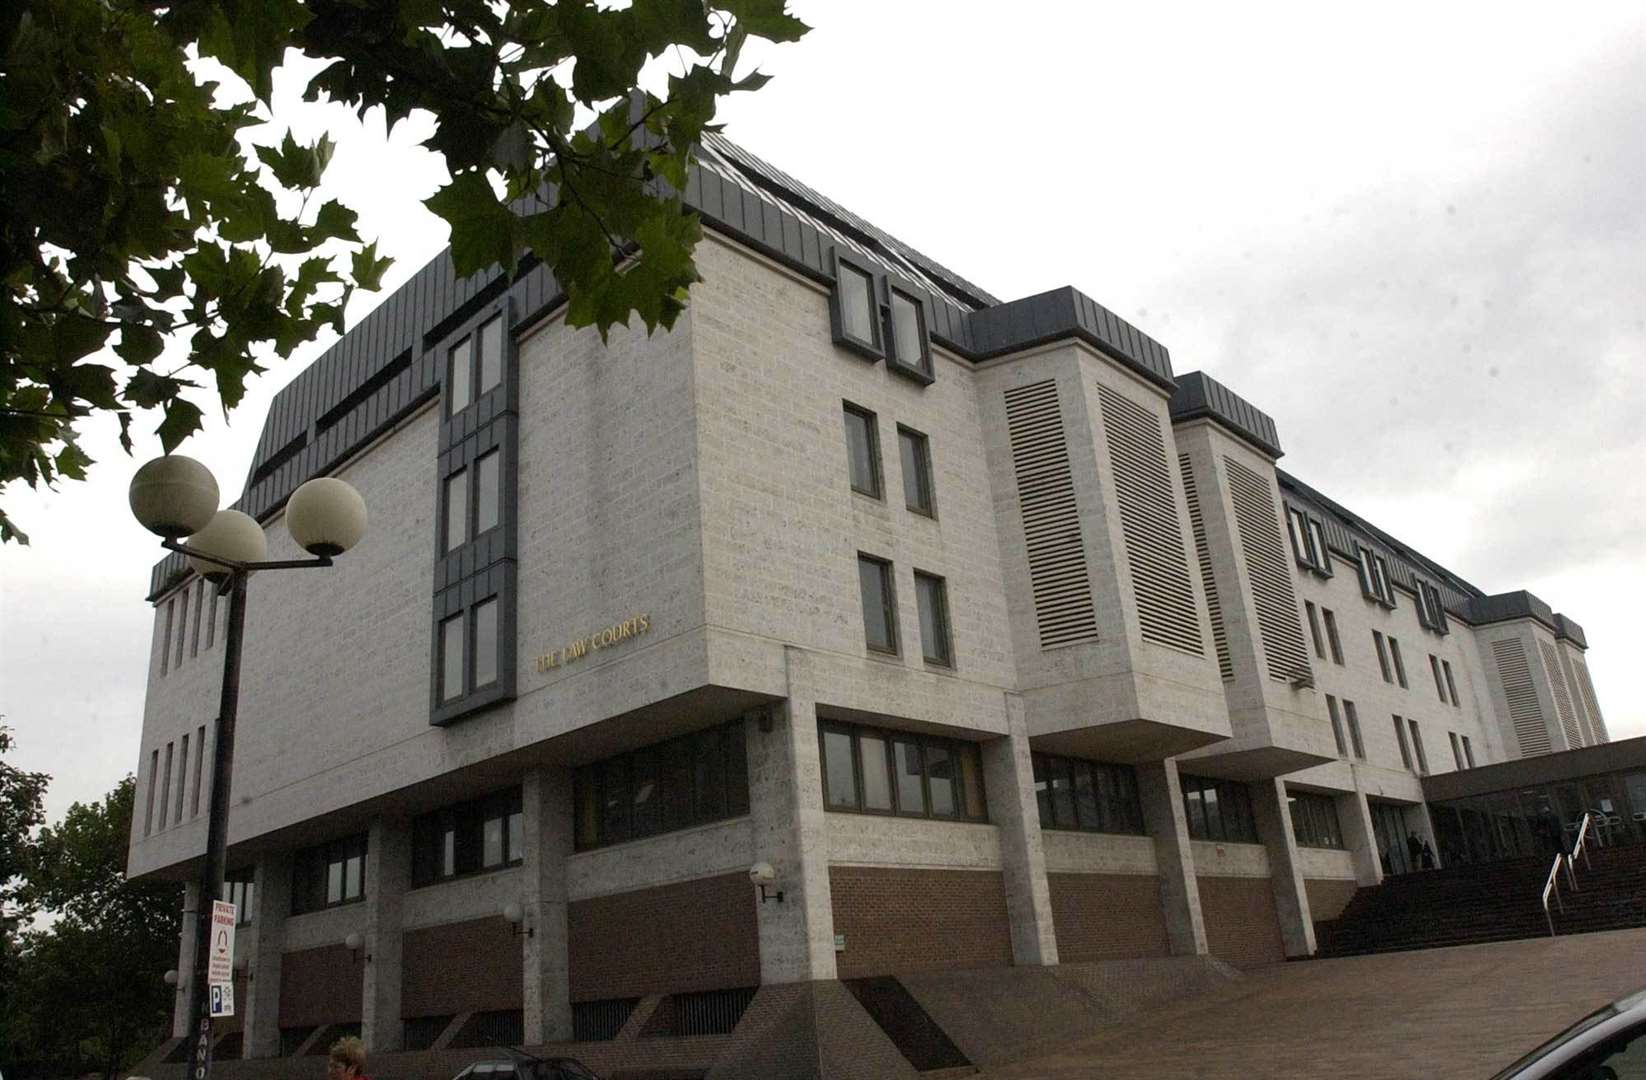 Dusan's case will be heard at Maidstone Crown Court